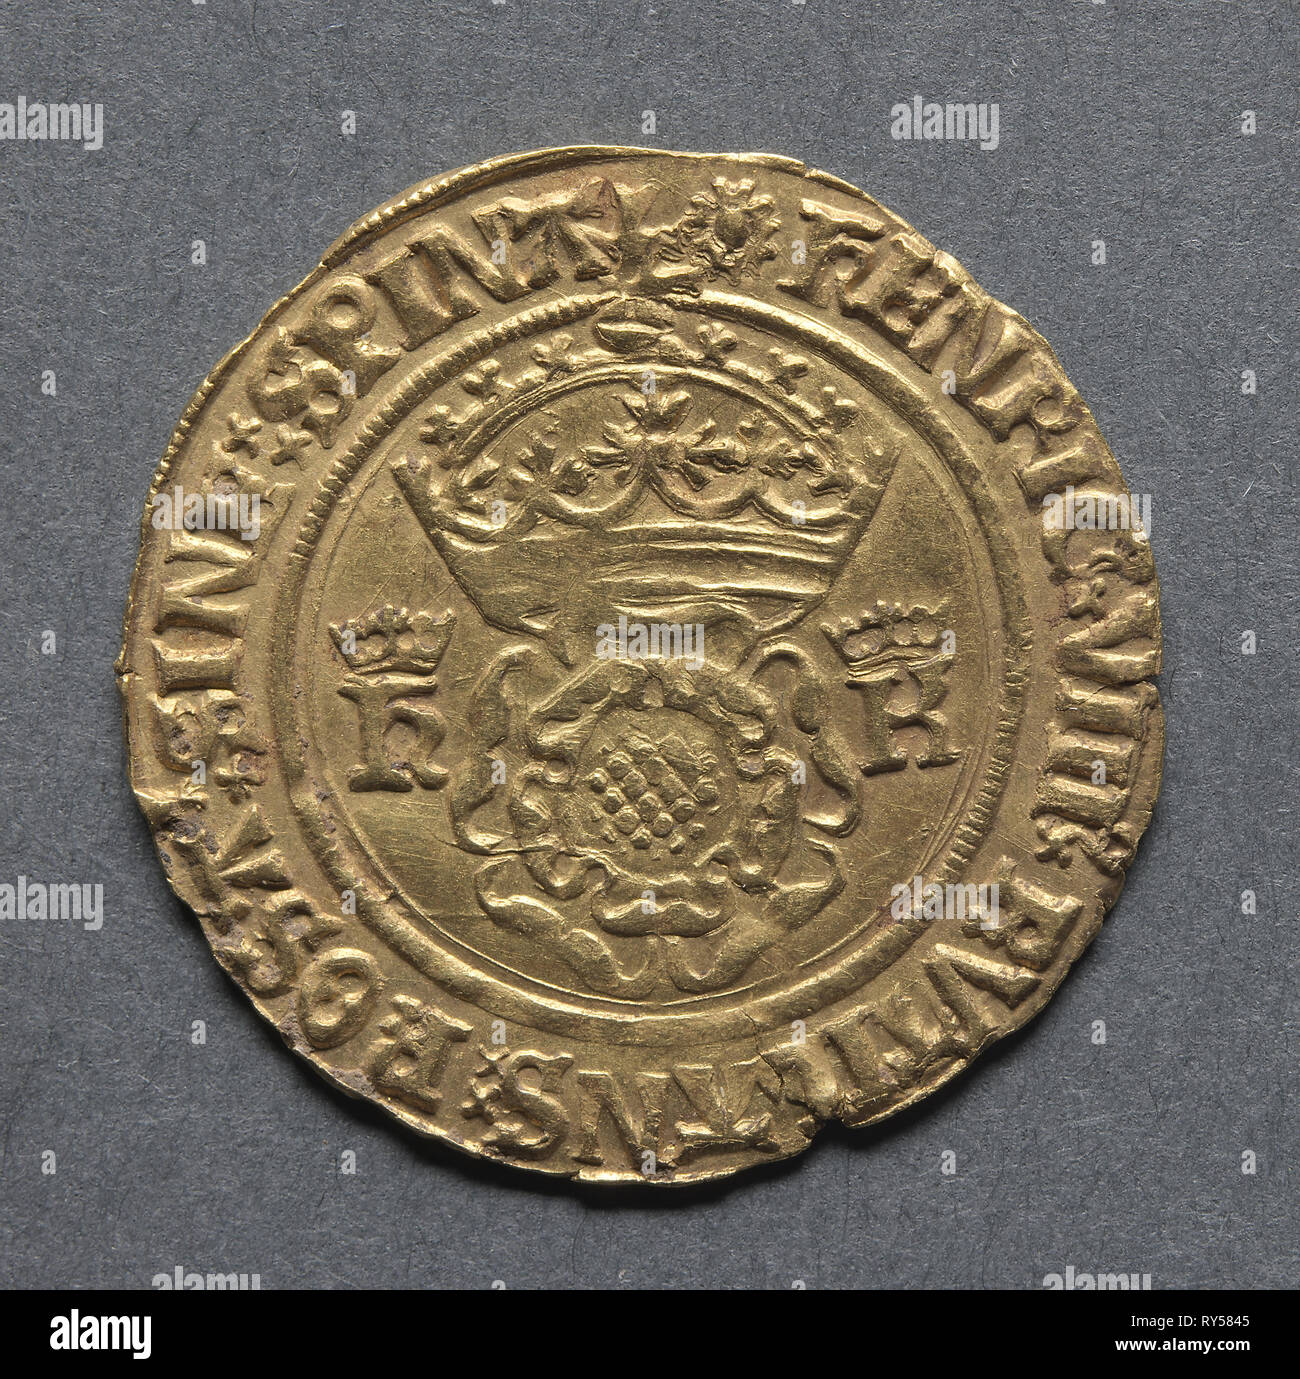 Crown of the Double Rose, 1526-1544. England, Henry VIII, 1509-1547. Gold Stock Photo